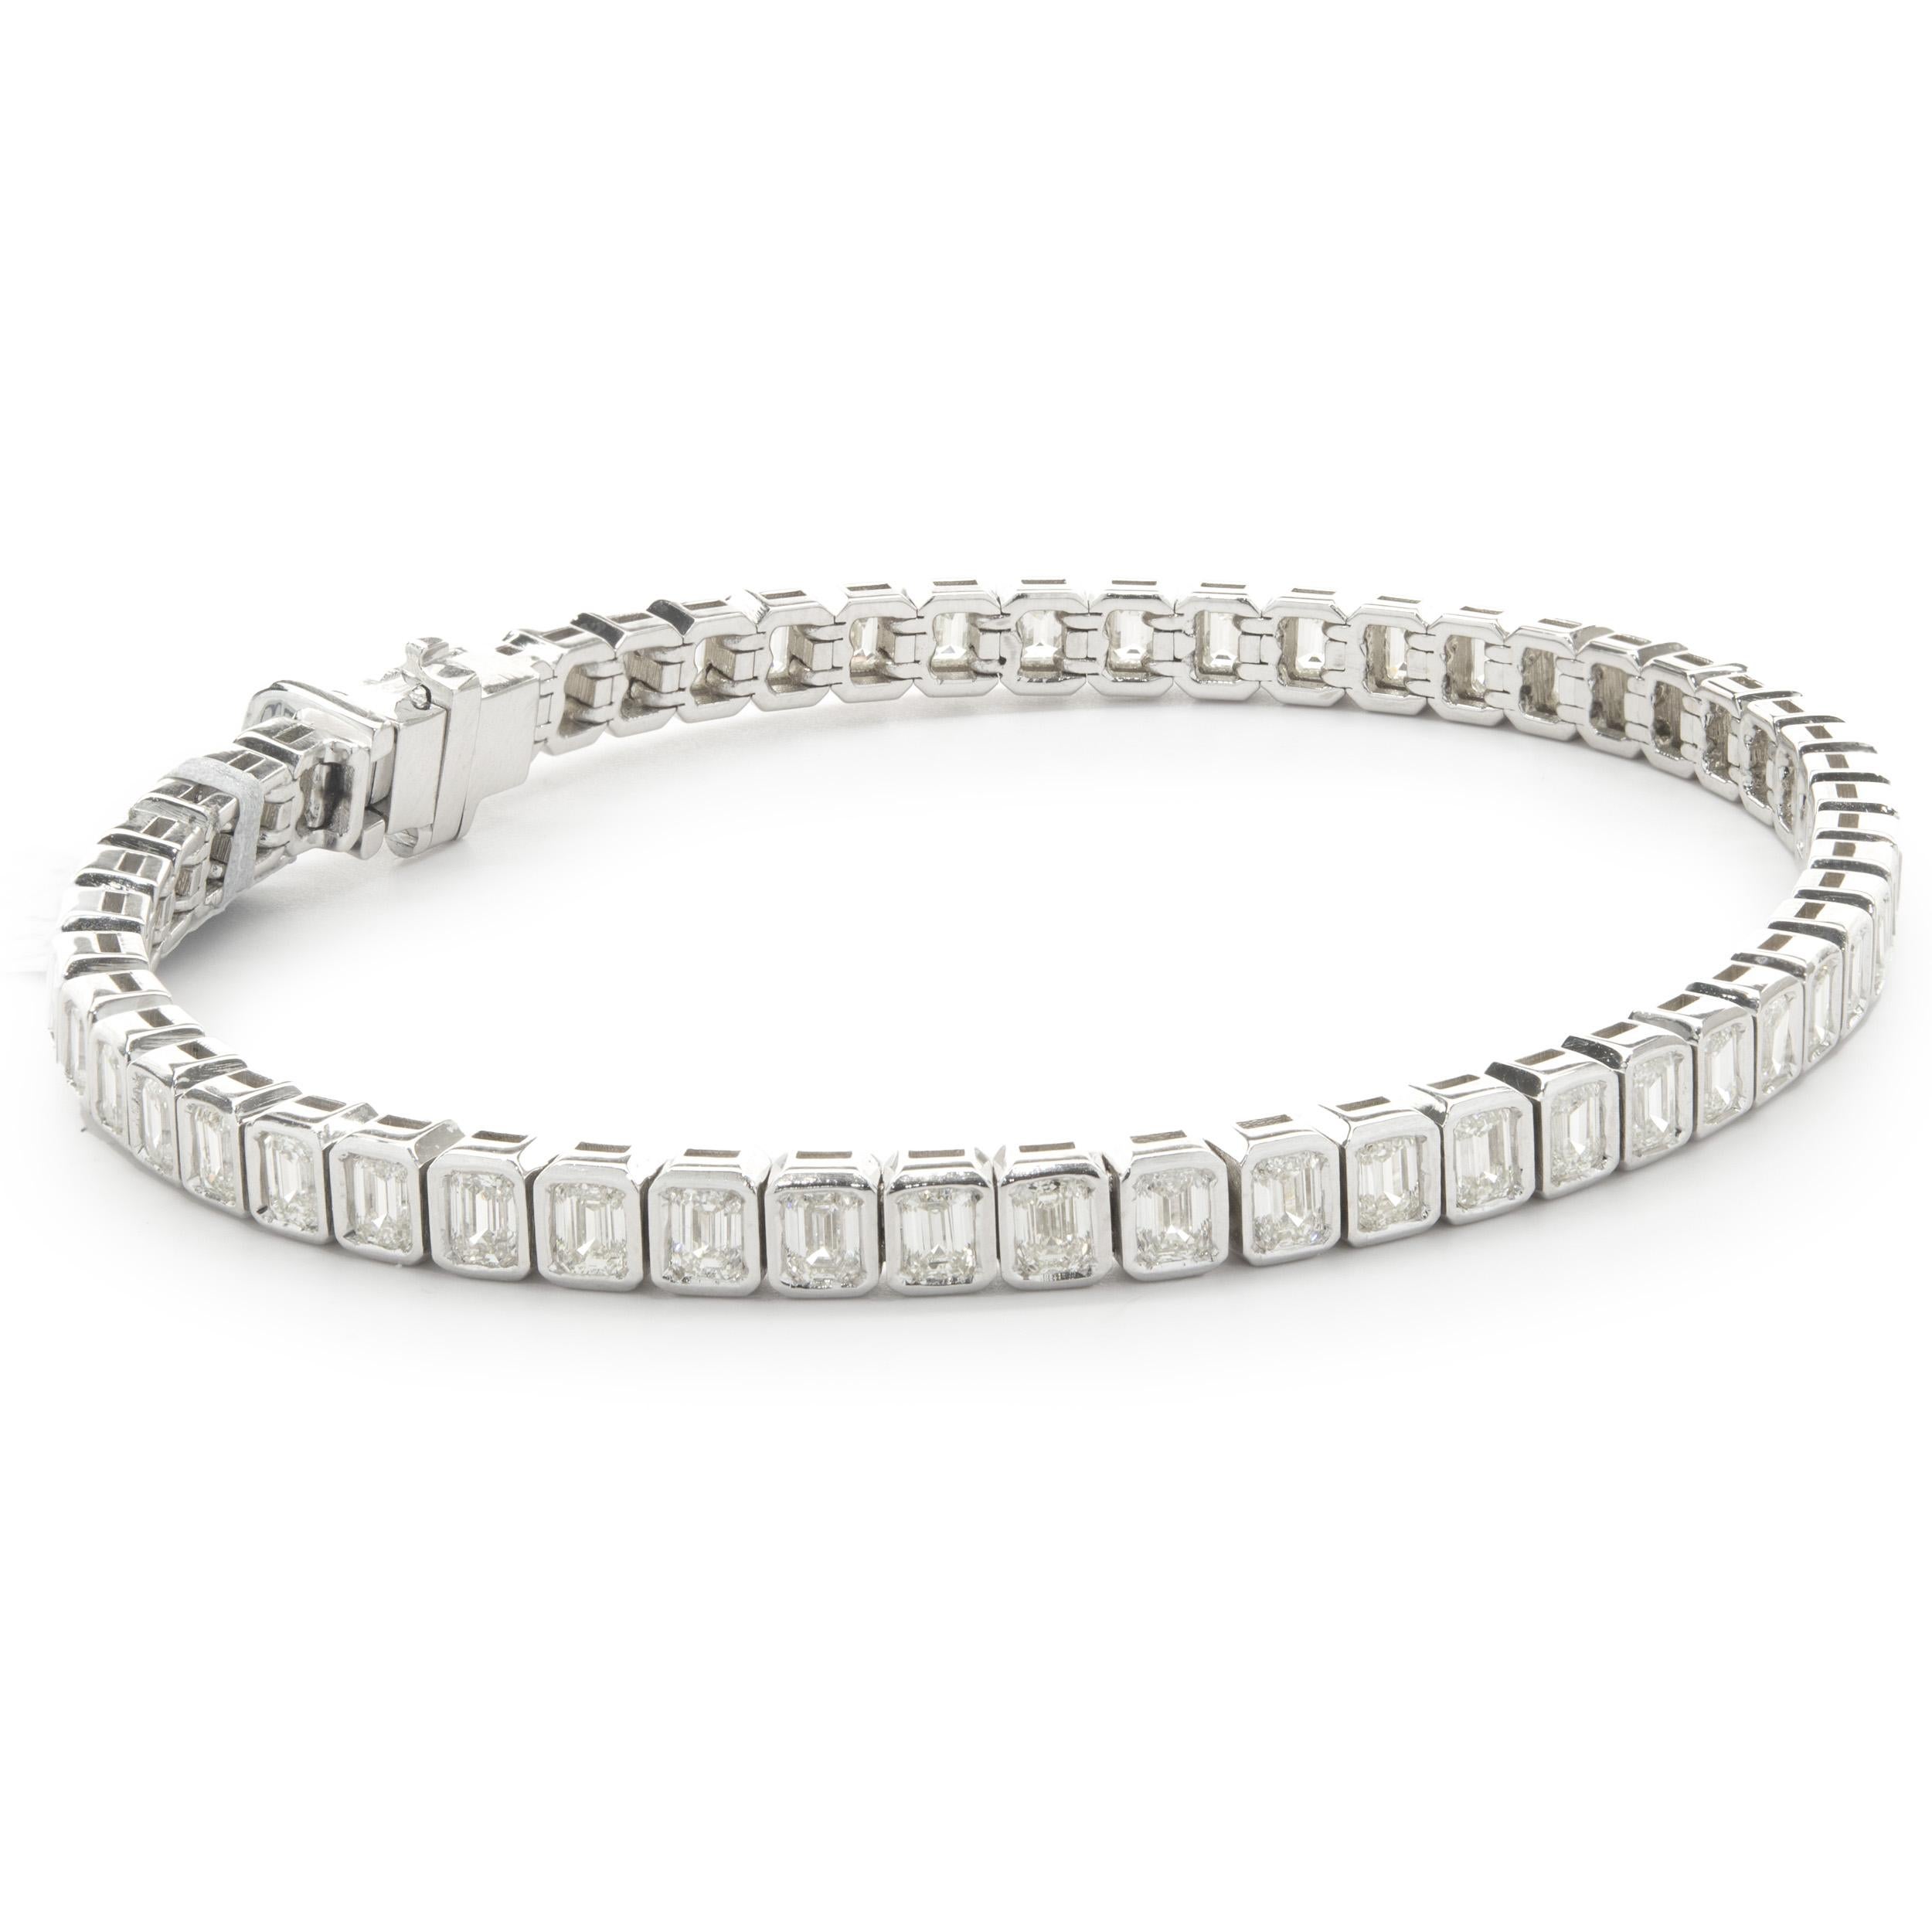 Designer: custom design
Material: 14K white gold
Diamonds: emerald cut = 5.05cttw
Color: I
Clarity: SI1
Dimensions: bracelet will fit up to a 7-inch wrist
Weight: 15.06 grams
